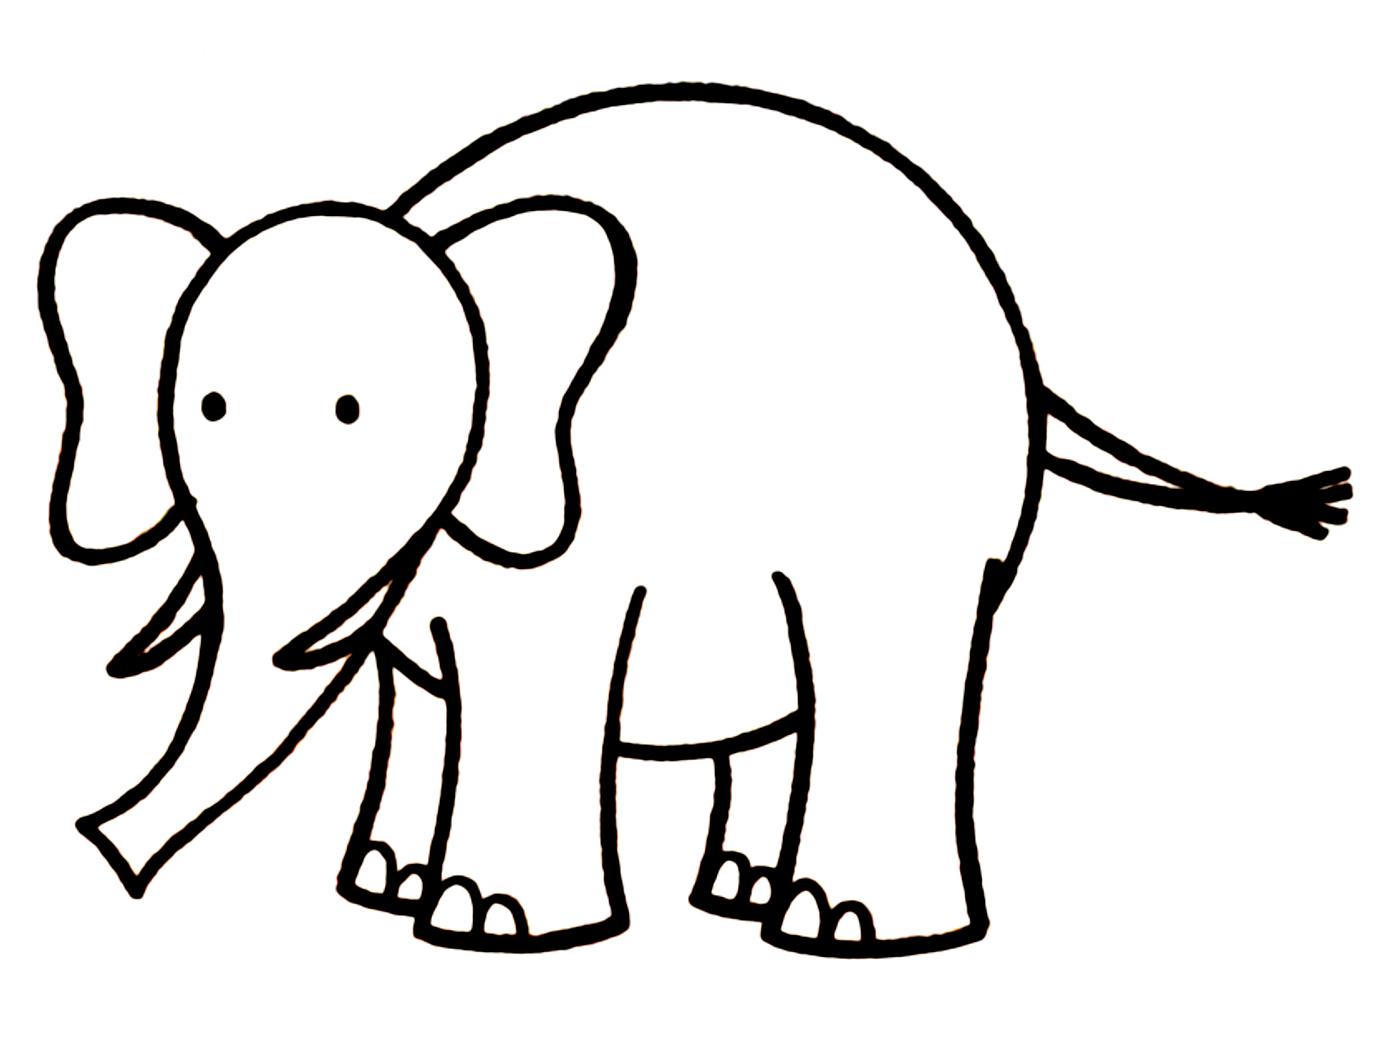 Elephant Drawing - ClipArt Best